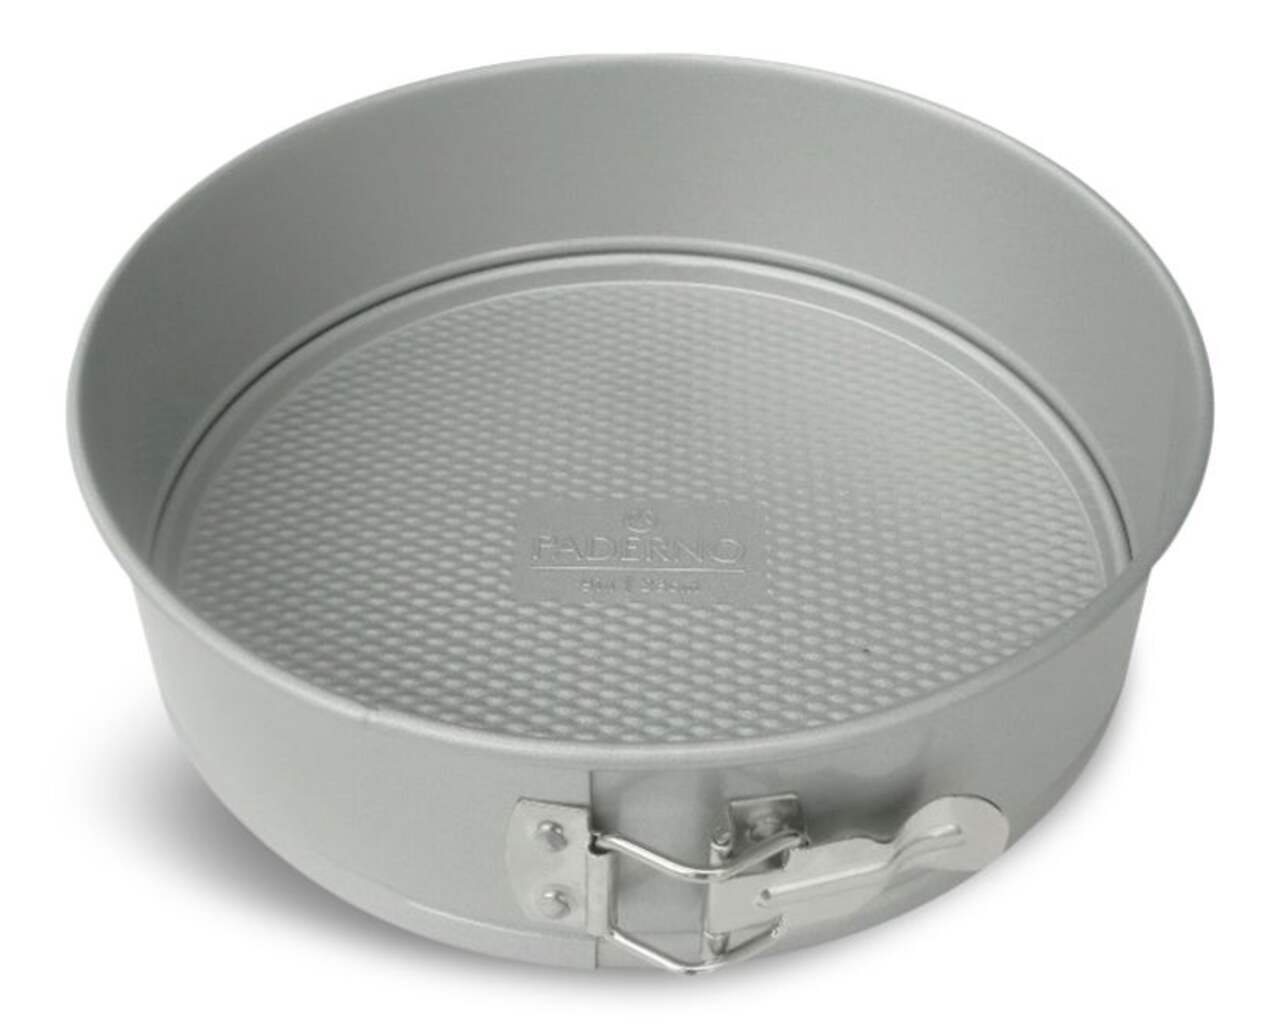 https://media-www.canadiantire.ca/product/living/kitchen/bakeware-baking-prep/1422895/paderno-professional-9-springform-pan-a8989d03-15c5-4d53-a31b-f888bd15e656-jpgrendition.jpg?imdensity=1&imwidth=640&impolicy=mZoom